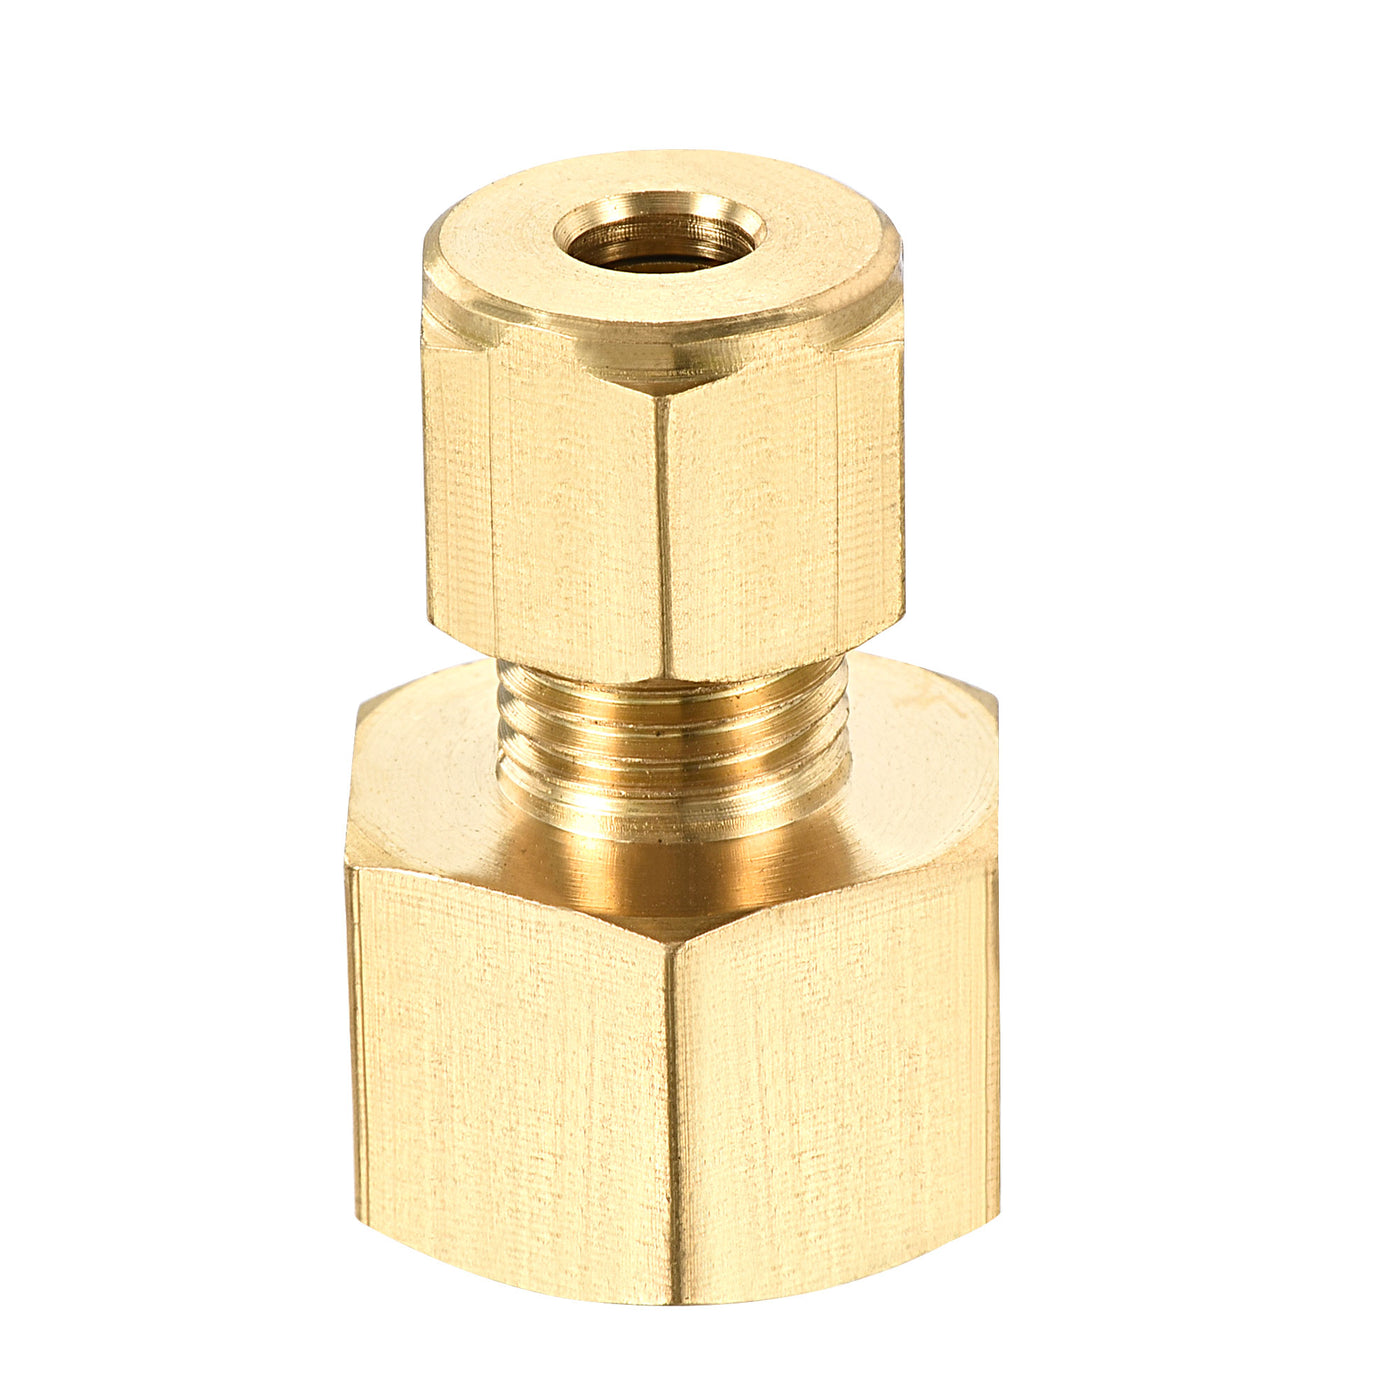 Uxcell Uxcell Compression Tube Fitting M18x1.5mm Female Thread x 6mm Tube OD Straight Coupling Adapter Brass